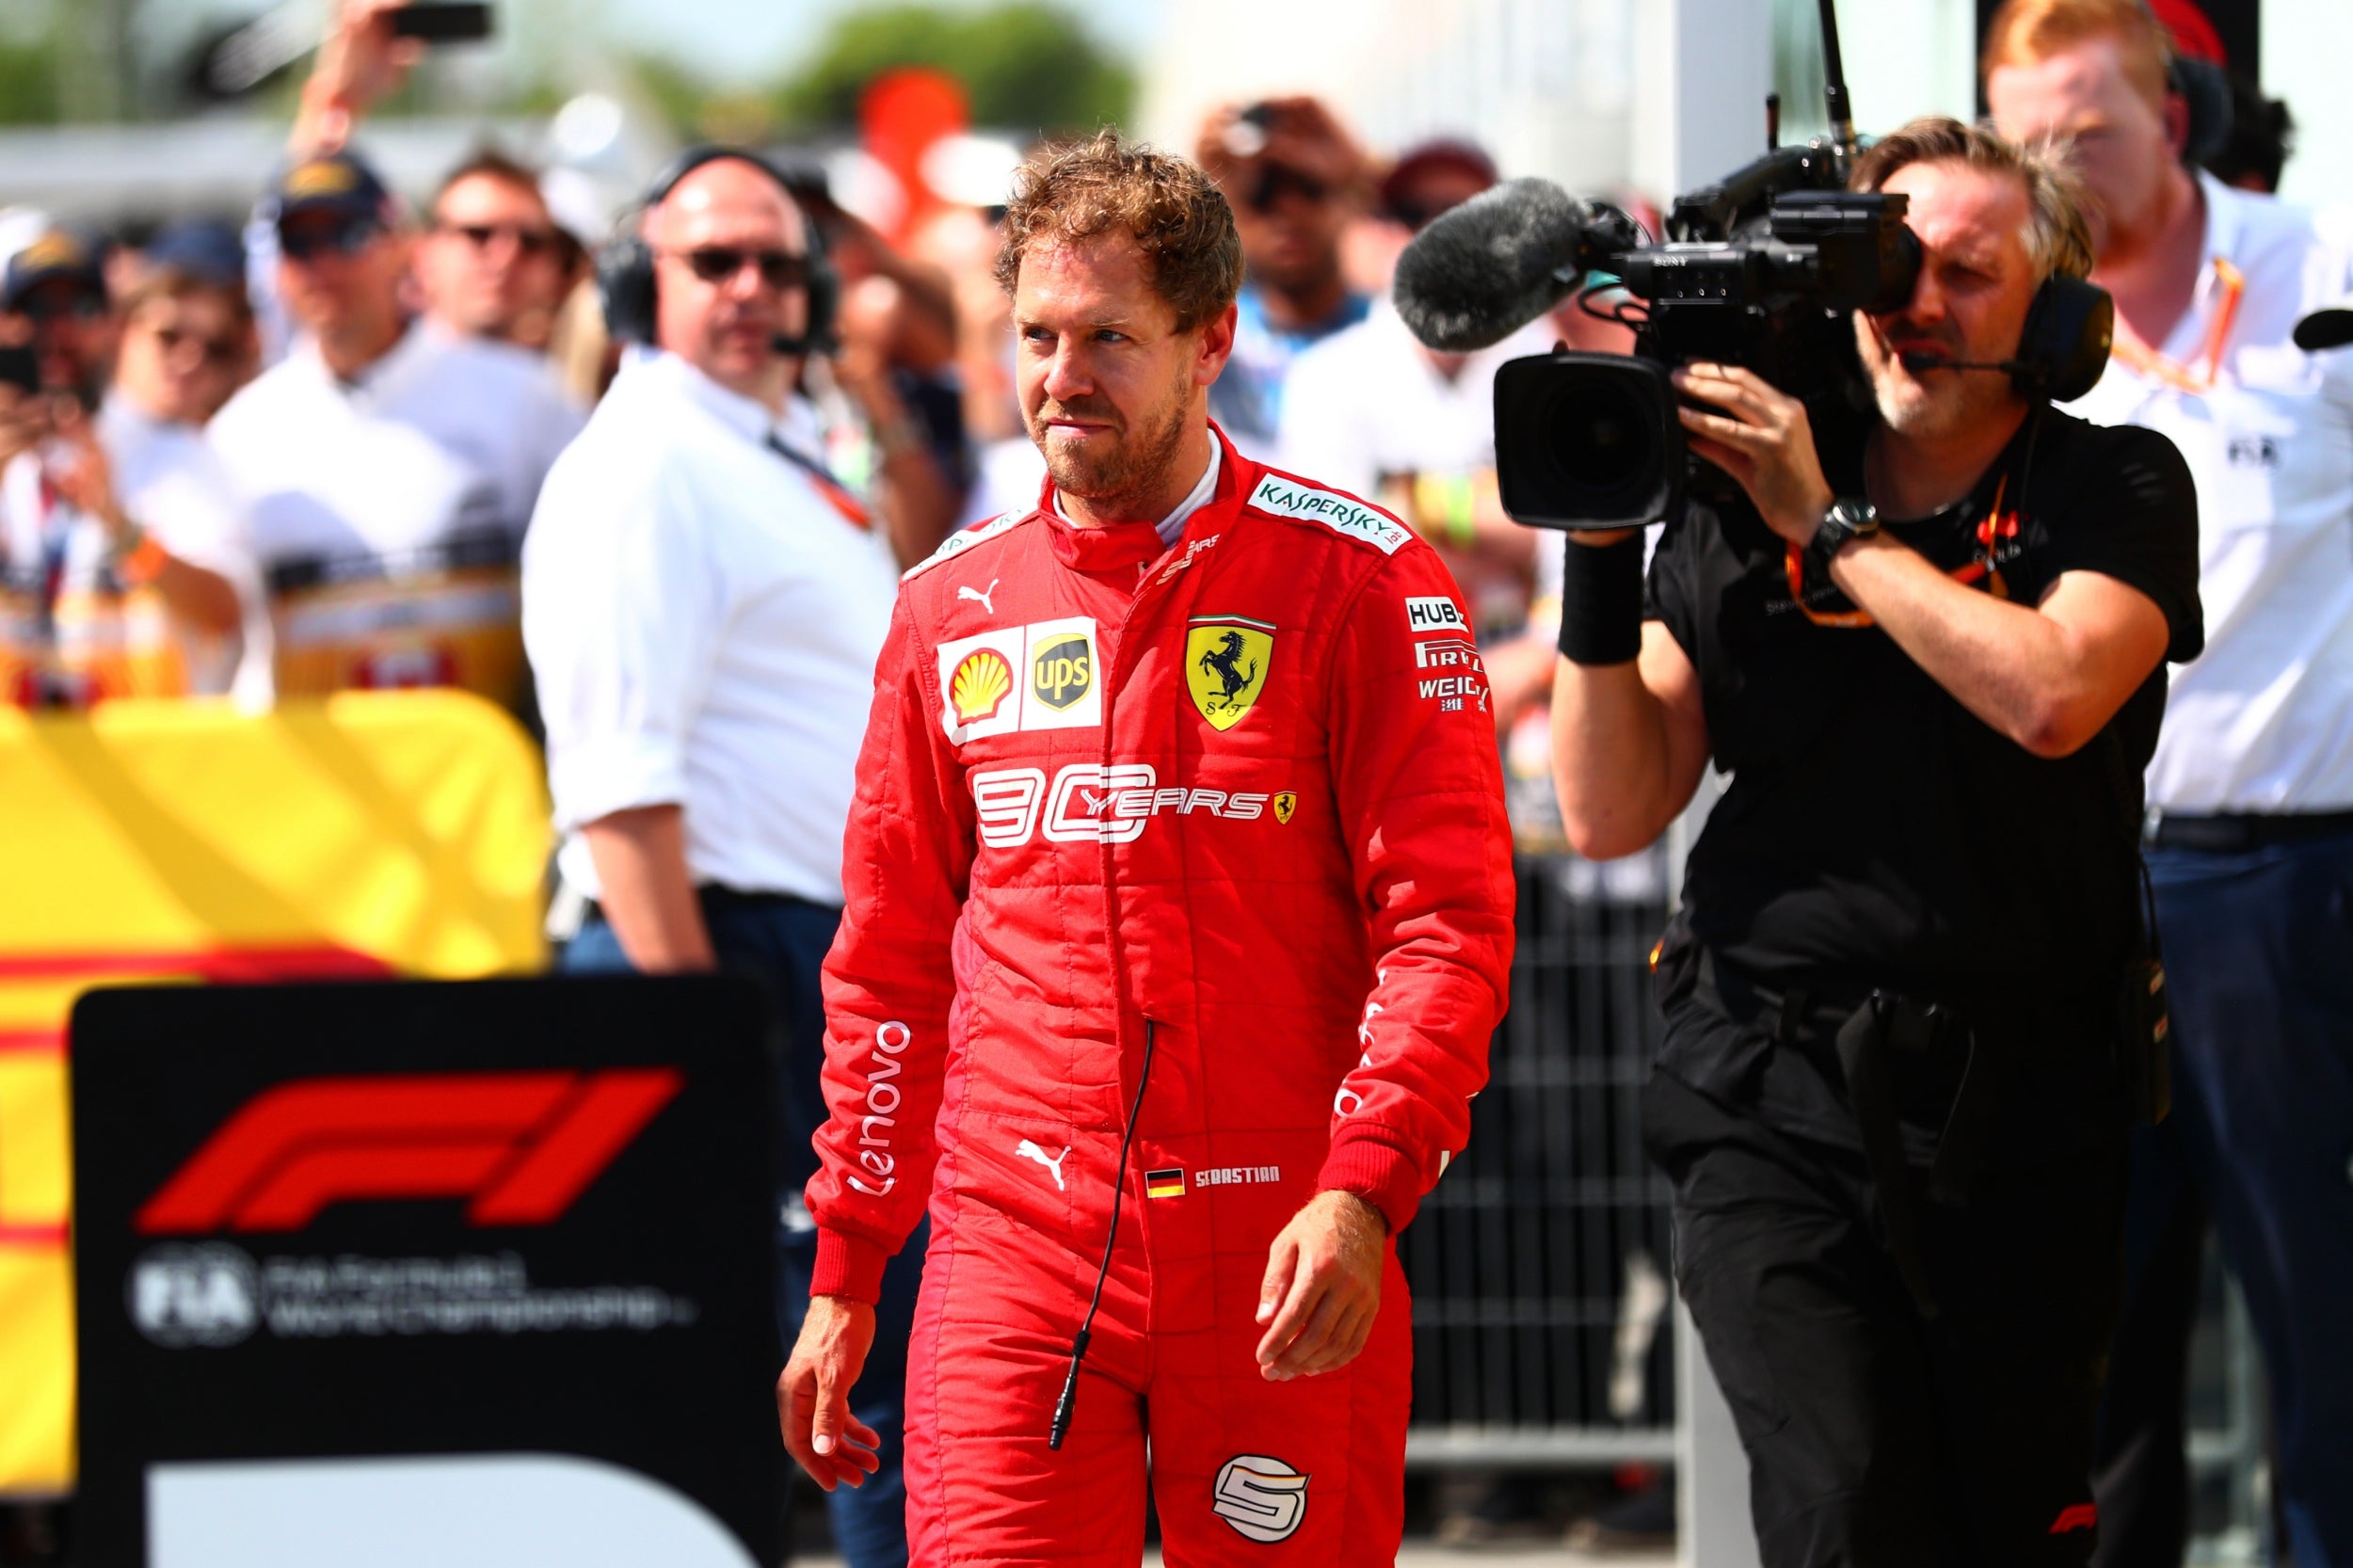 Vettel wasn't pleased with the result in Canada